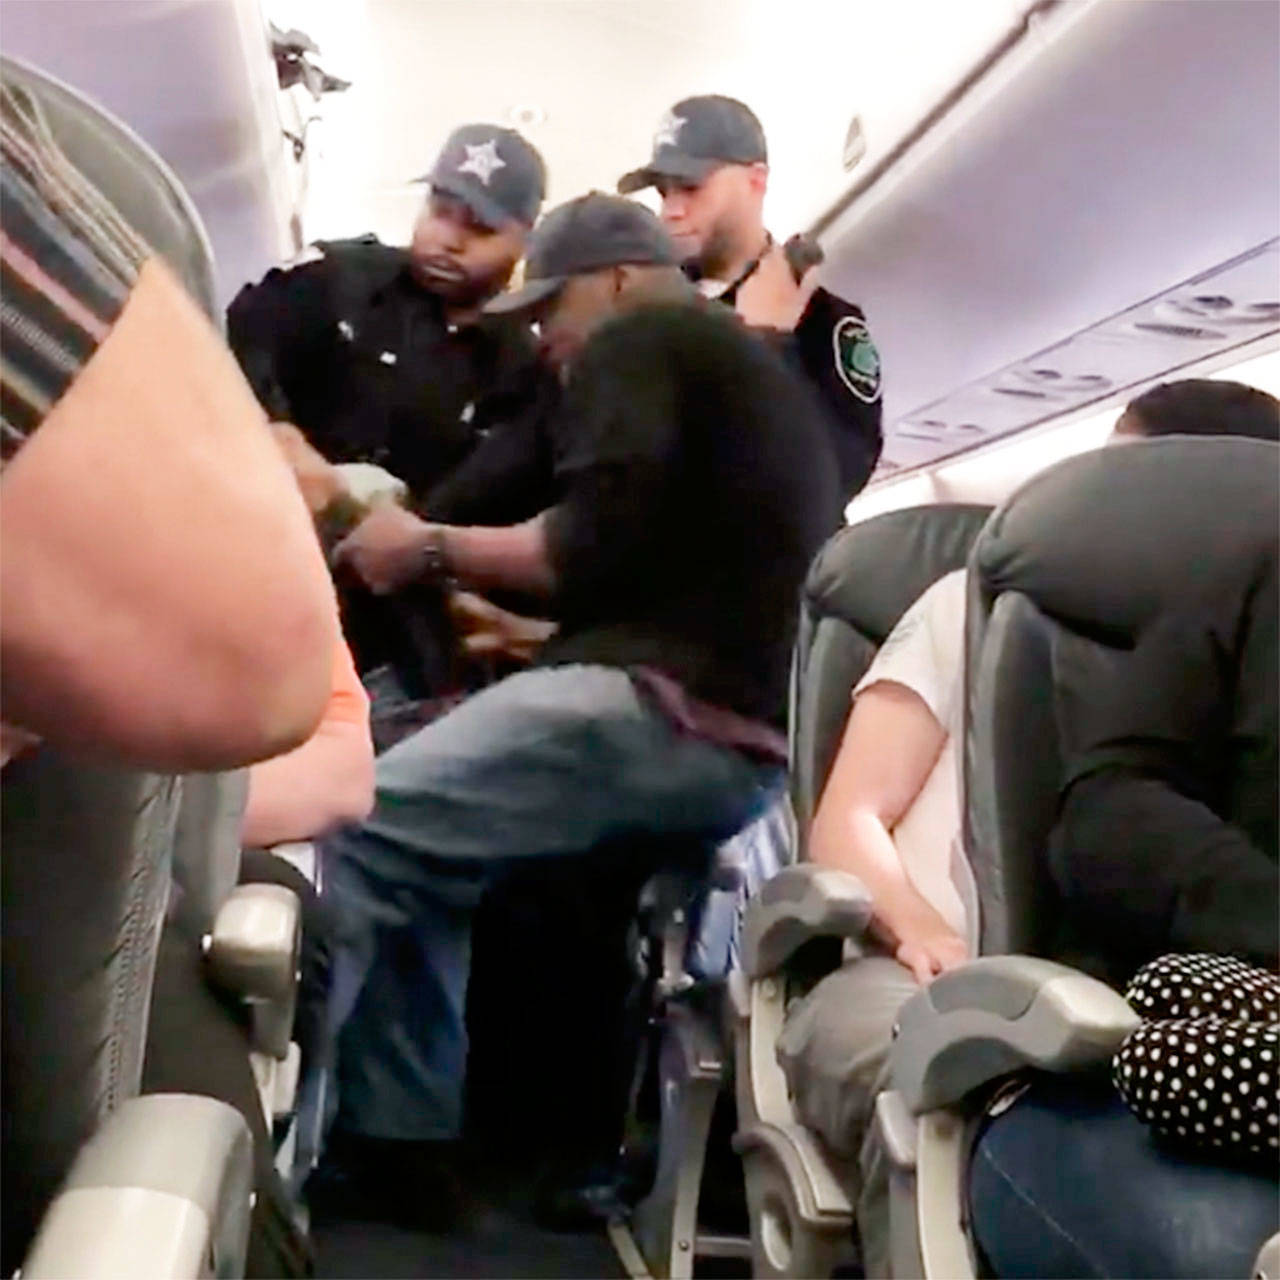 Police remove a passenger from a United Airlines flight in Chicago on Sunday. (Audra D. Bridges via Facebook)